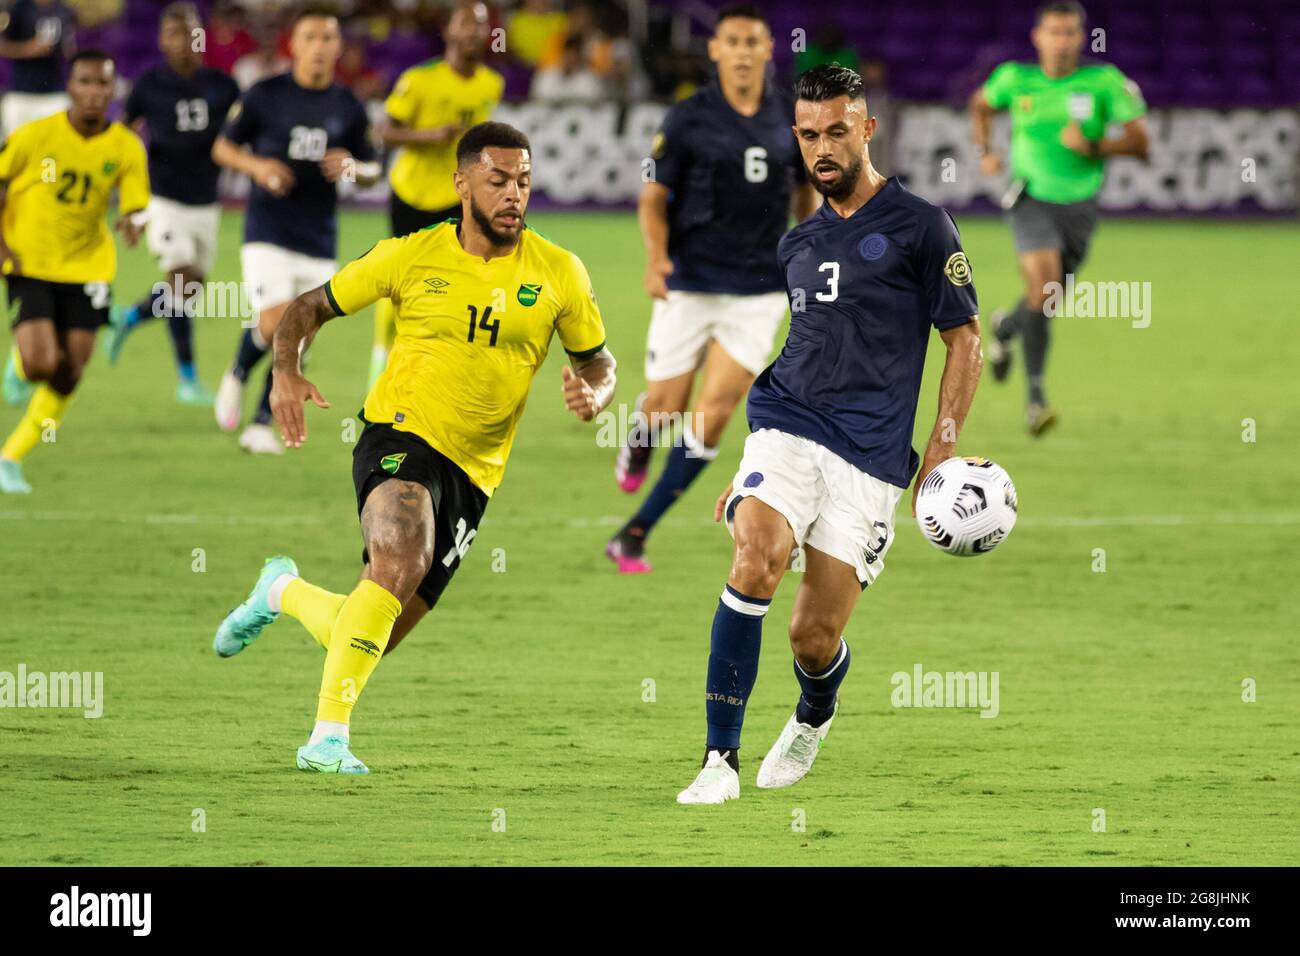 Orlando, United States. 21st July, 2021. Giancarlo Gonzalez (3 Costa Rica) passes the ball back to the goal keeper before Andre Gray (14 Jamaica) could intercept during the CONCACAF Gold Cup game between Costa Rica and Jamaica at Exploria Stadium in Orlando, Florida. NO COMMERCIAL USAGE. Credit: SPP Sport Press Photo. /Alamy Live News Stock Photo